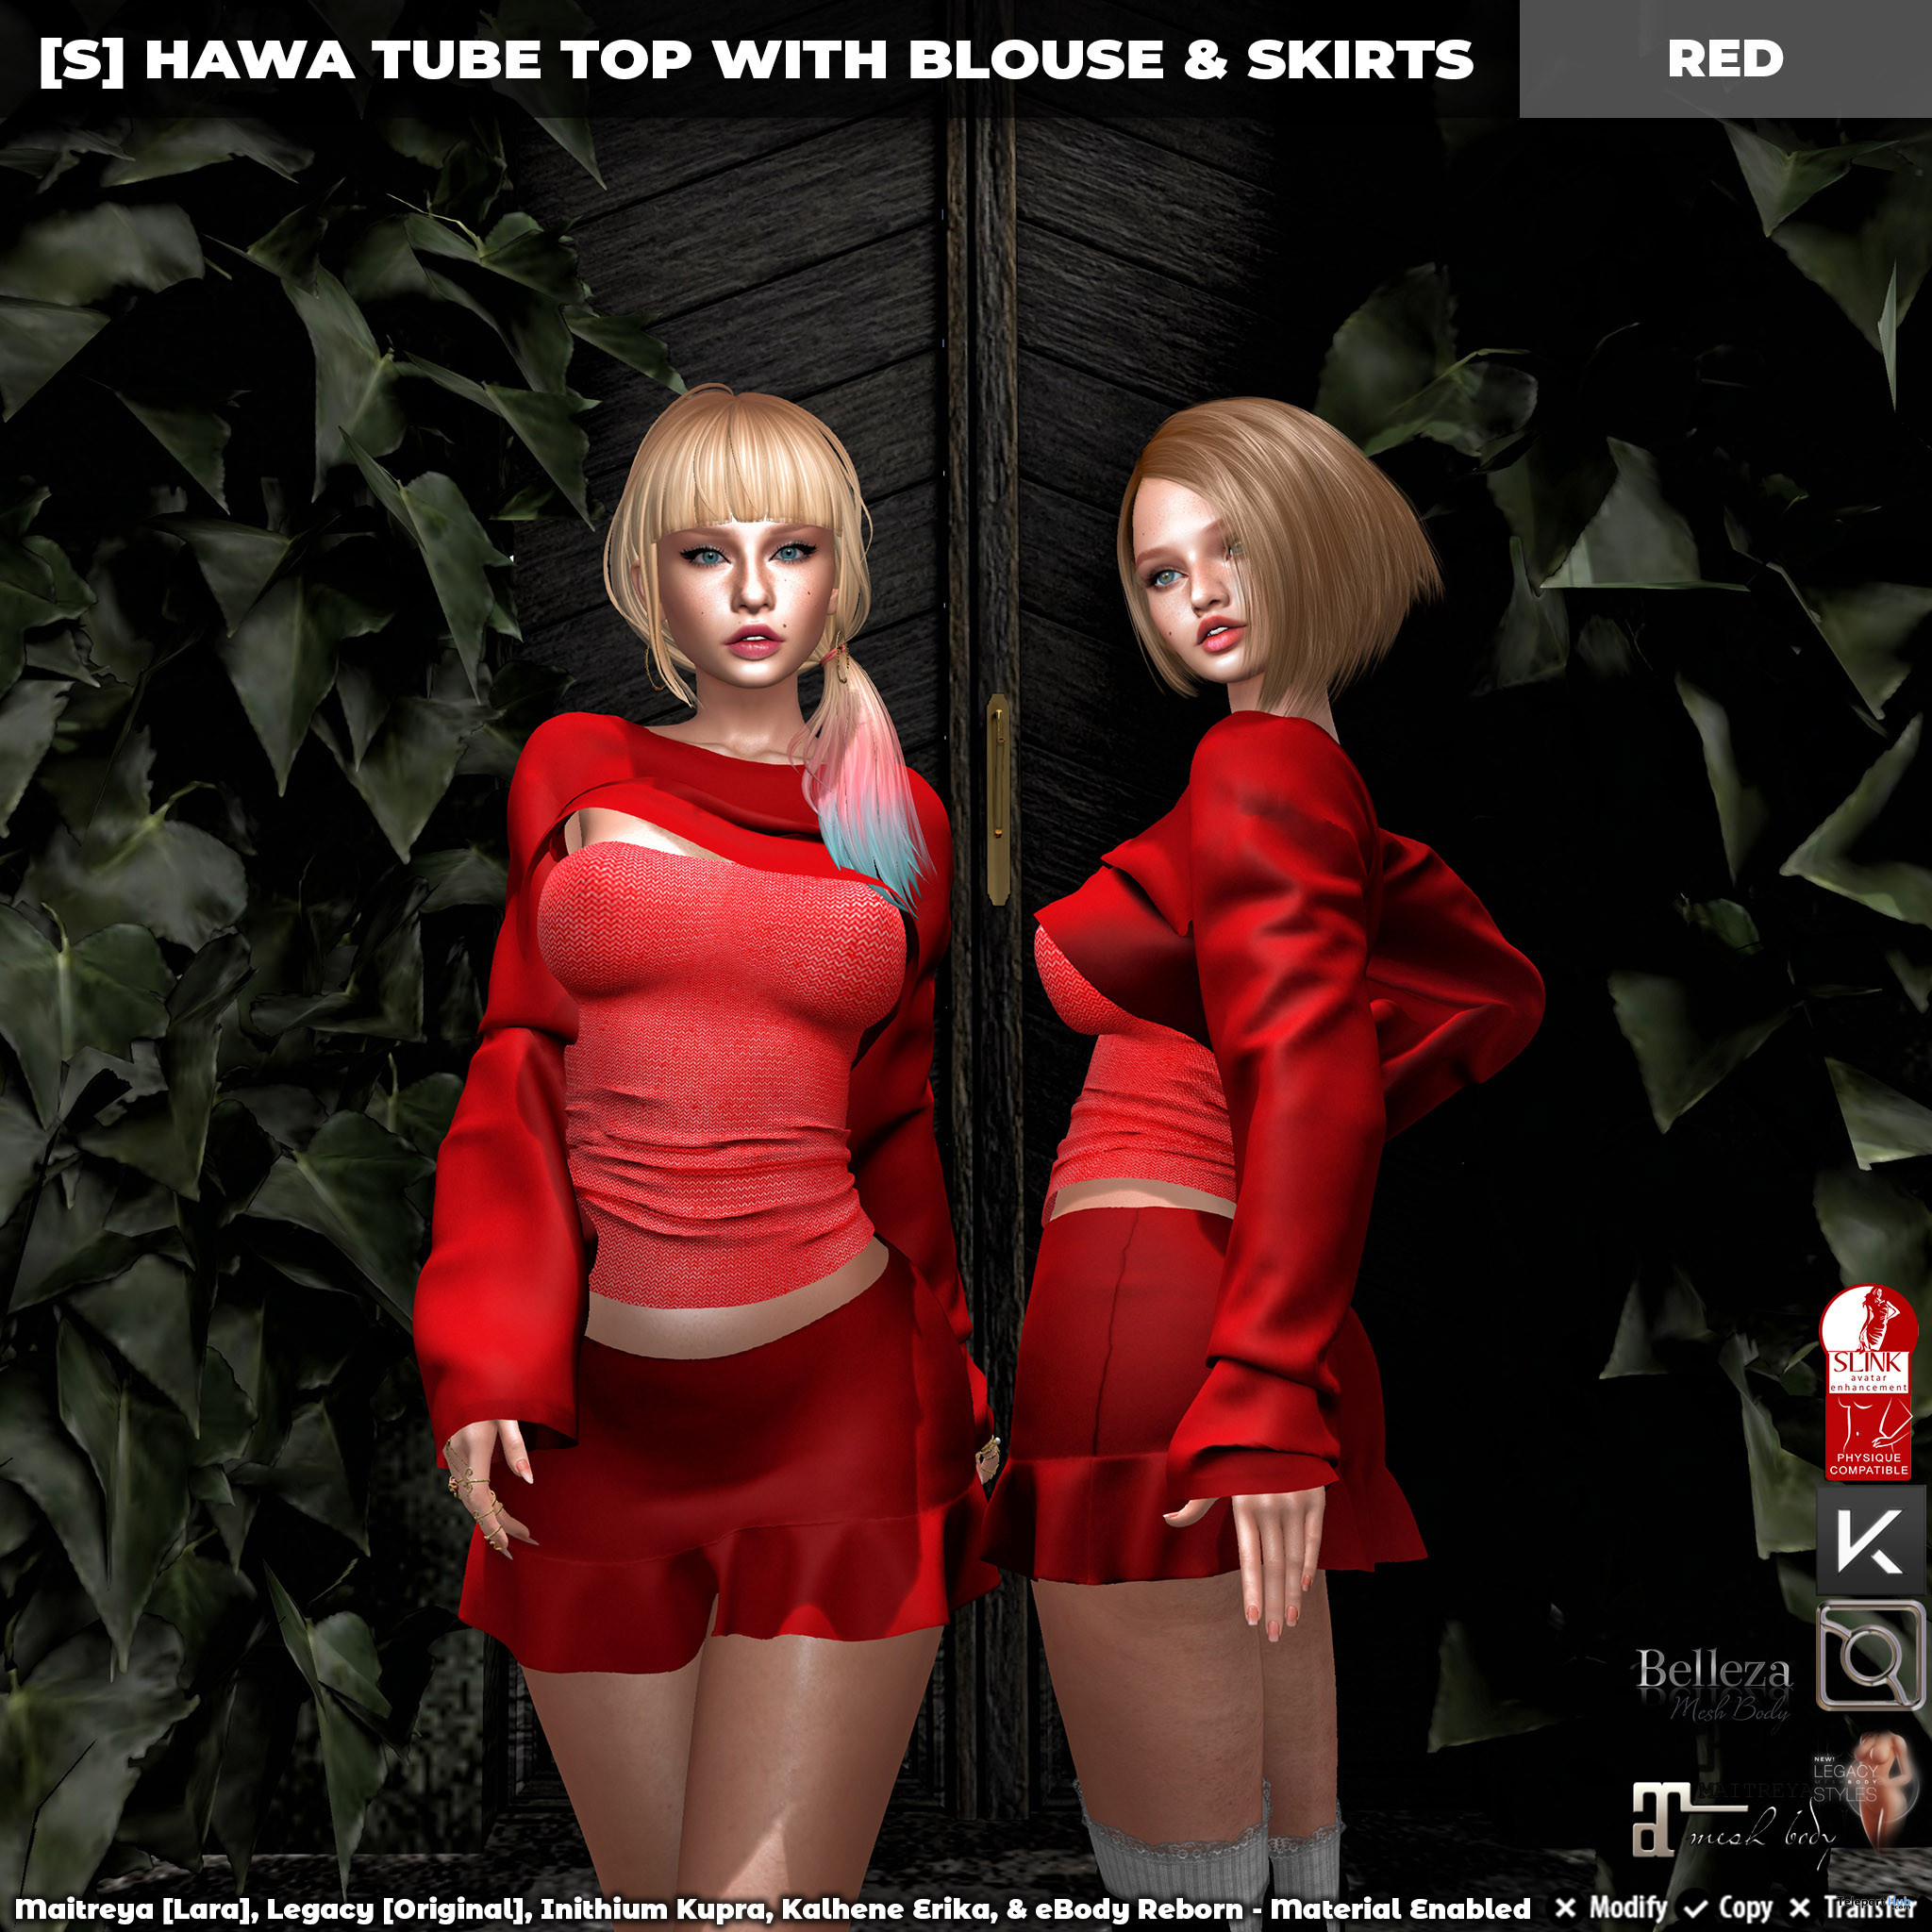 New Release: [S] Hawa Tube Top With Blouse & Skirts by [satus Inc] - Teleport Hub - teleporthub.com